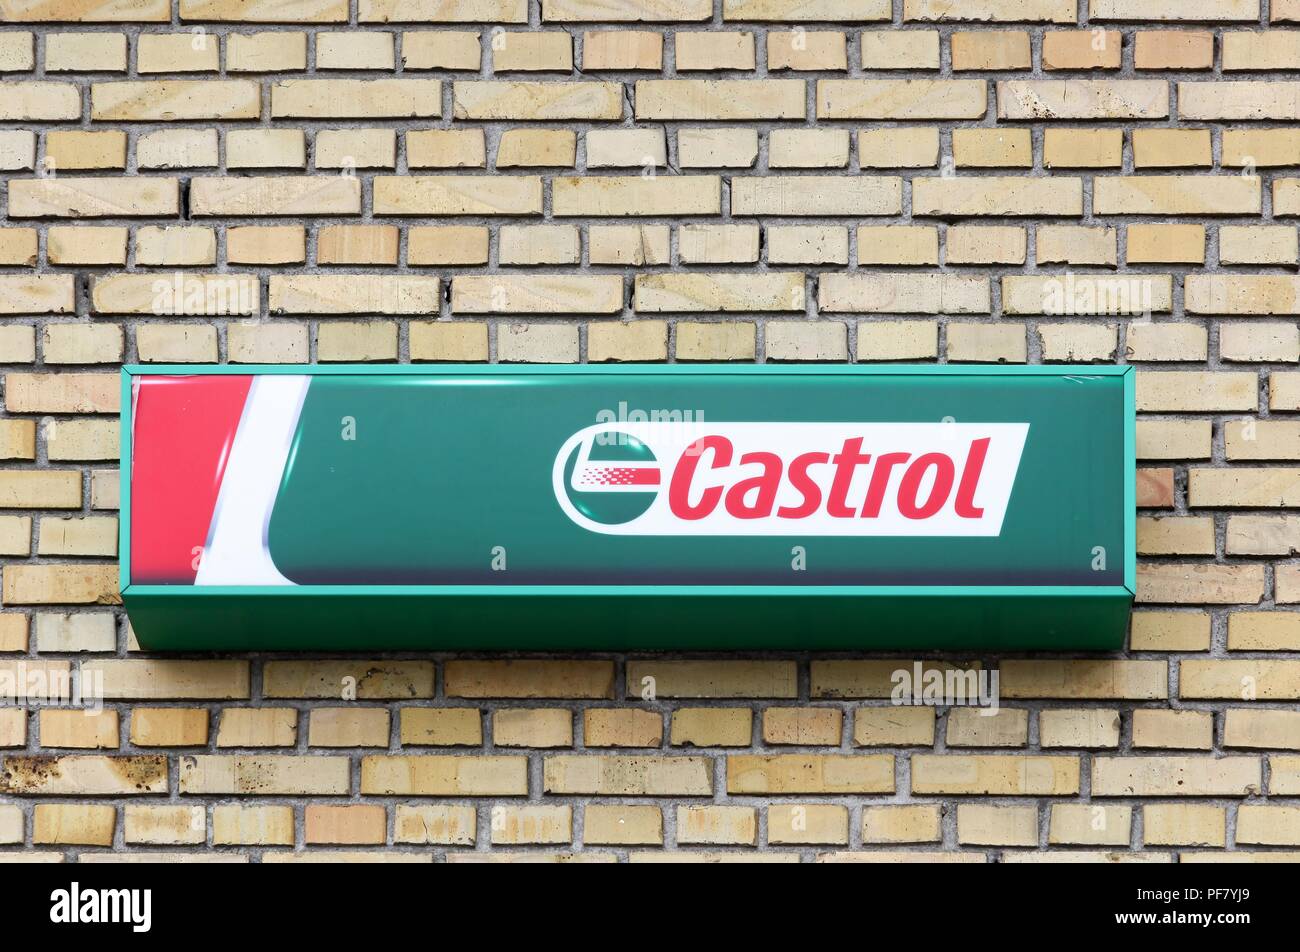 Tilst, Denmark - May 10, 2018: Castrol logo on a wall. Castrol is a British global brand of industrial and automotive lubricants Stock Photo